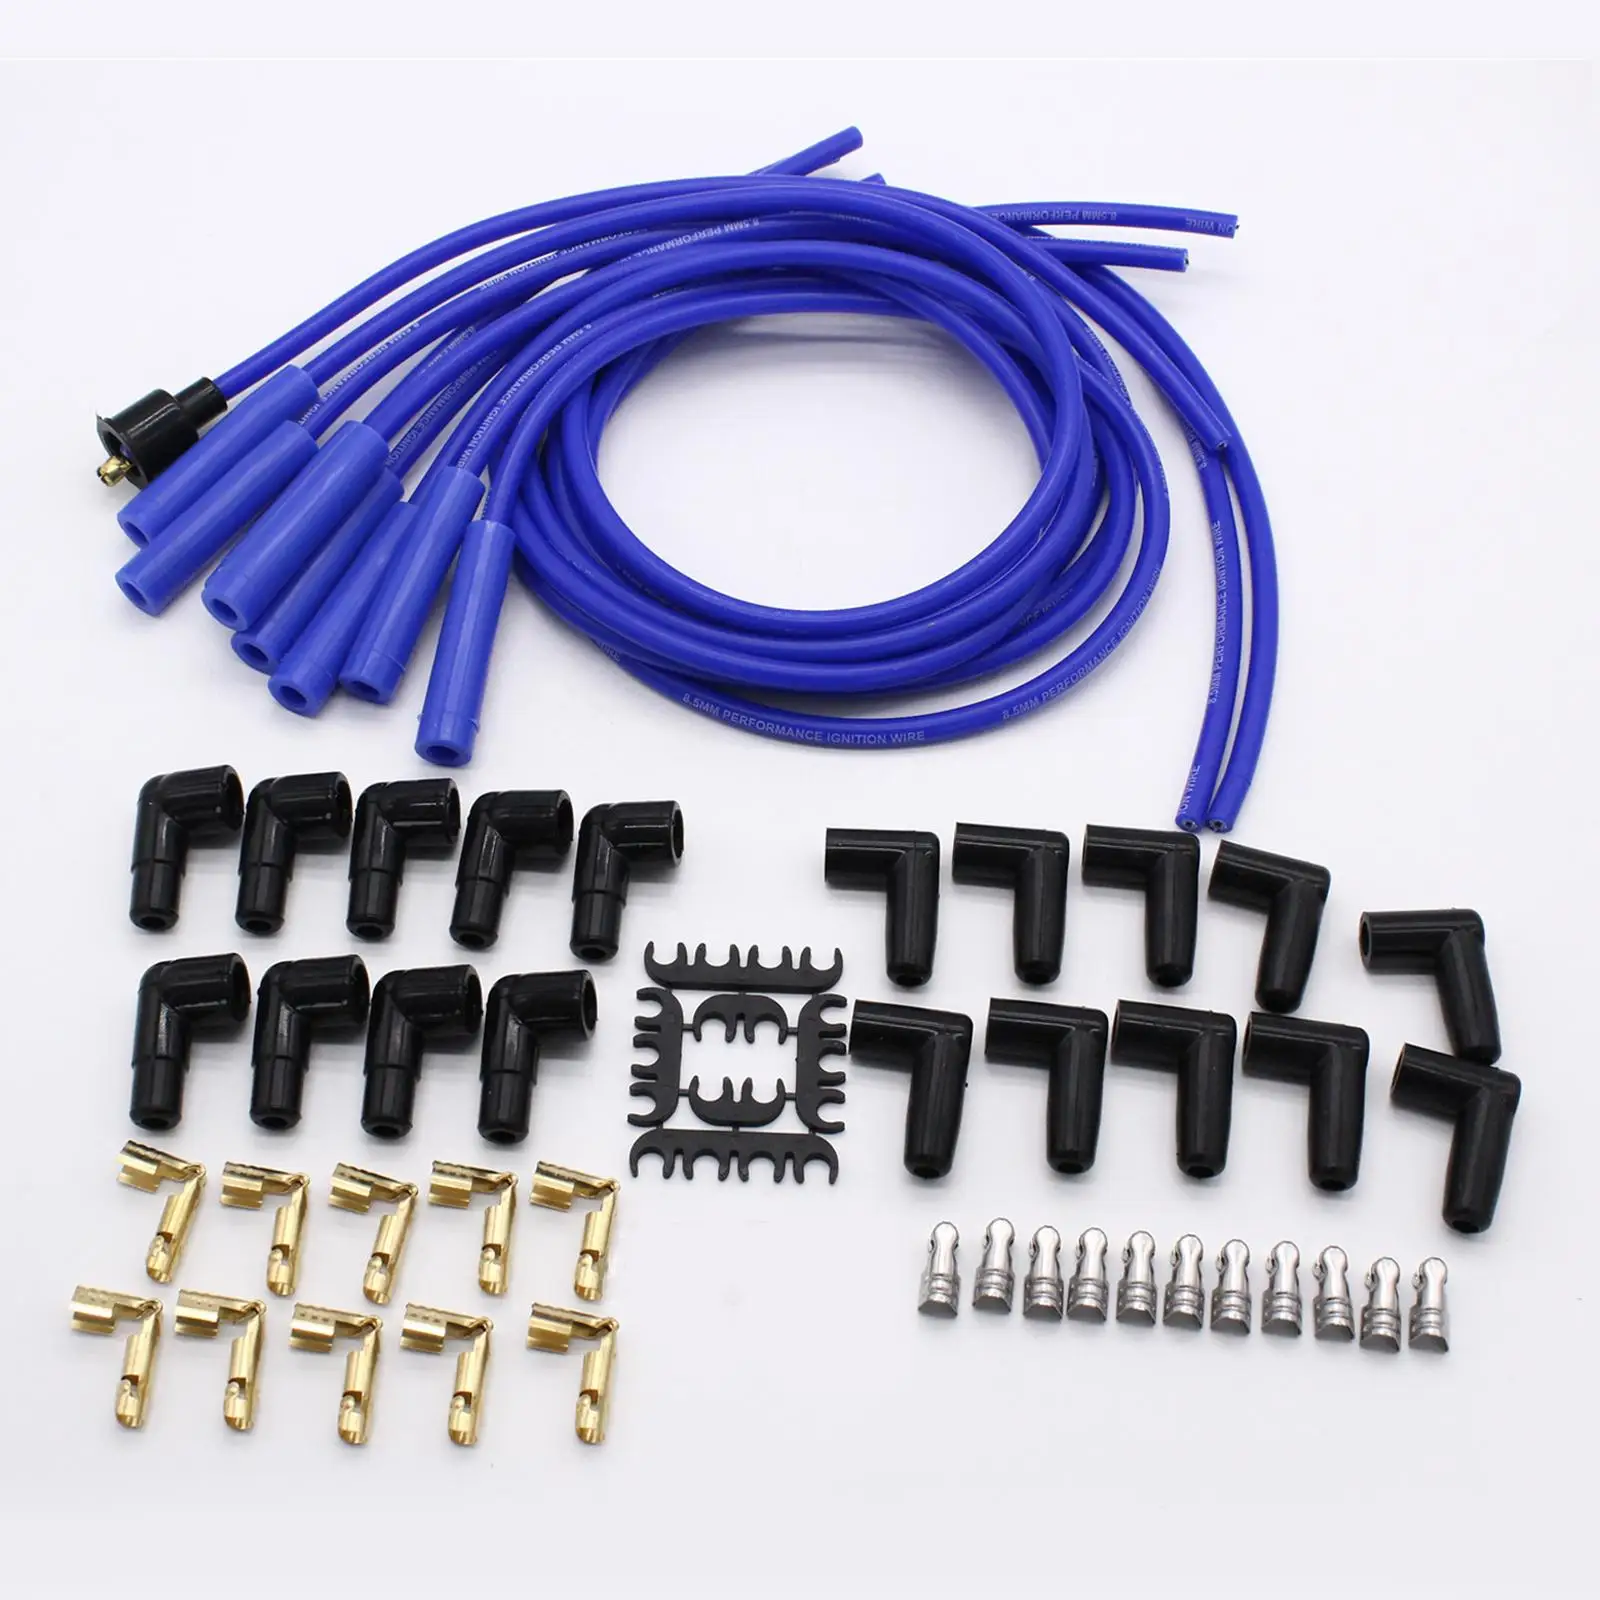 Universal 8mm Ignition Wire Set 180 Degree Boots Spark Plug Wire Car Accessories Spare Parts Direct Mount Reliable